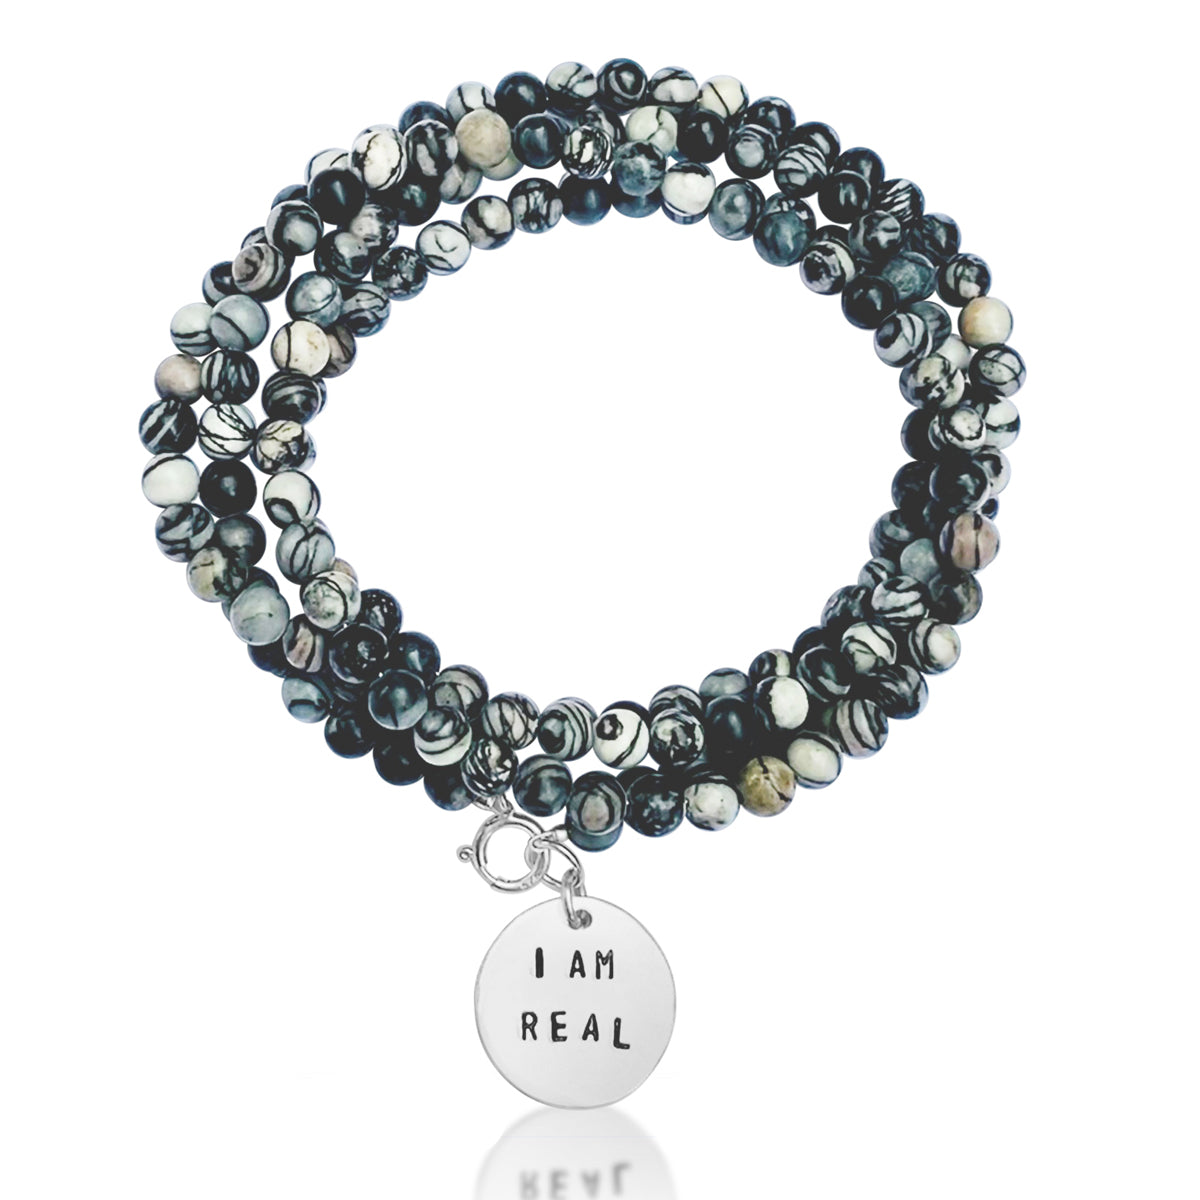 I am Real Affirmation Bracelet with Jasper to Help Stabilize your Mood Swings. "To be yourself in a world that is constantly trying to make you something else is the greatest accomplishment." Ralph Waldo Emerson. Trying to please EVERYONE is a recipe for frustration. Be yourself, be real and you will be happier.